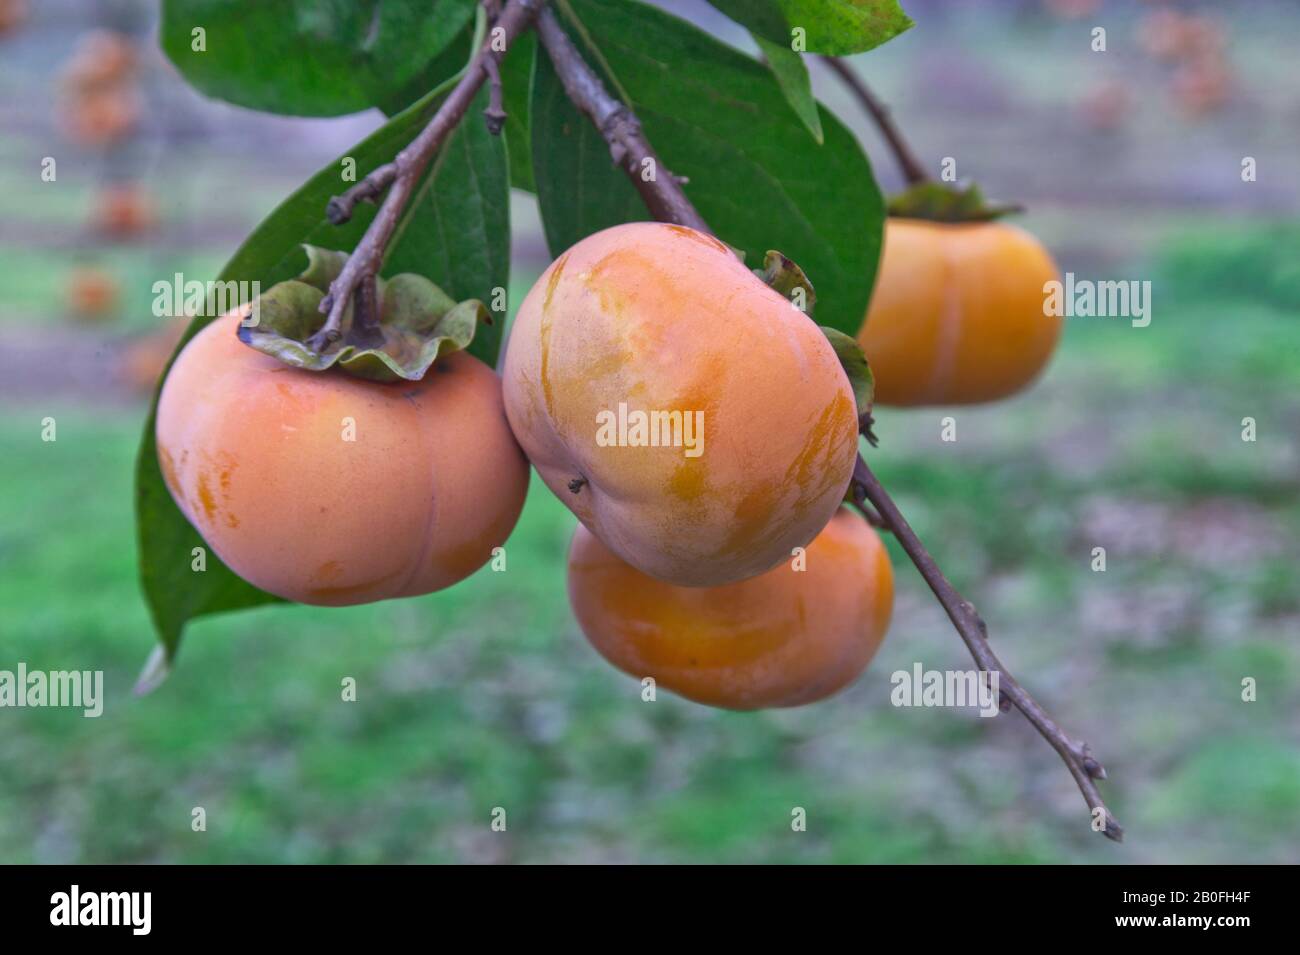 Persimmons 'Fuyu' variety hanging on branch, Diospyros kaki, also known as Japanese persimmon, California. Stock Photo